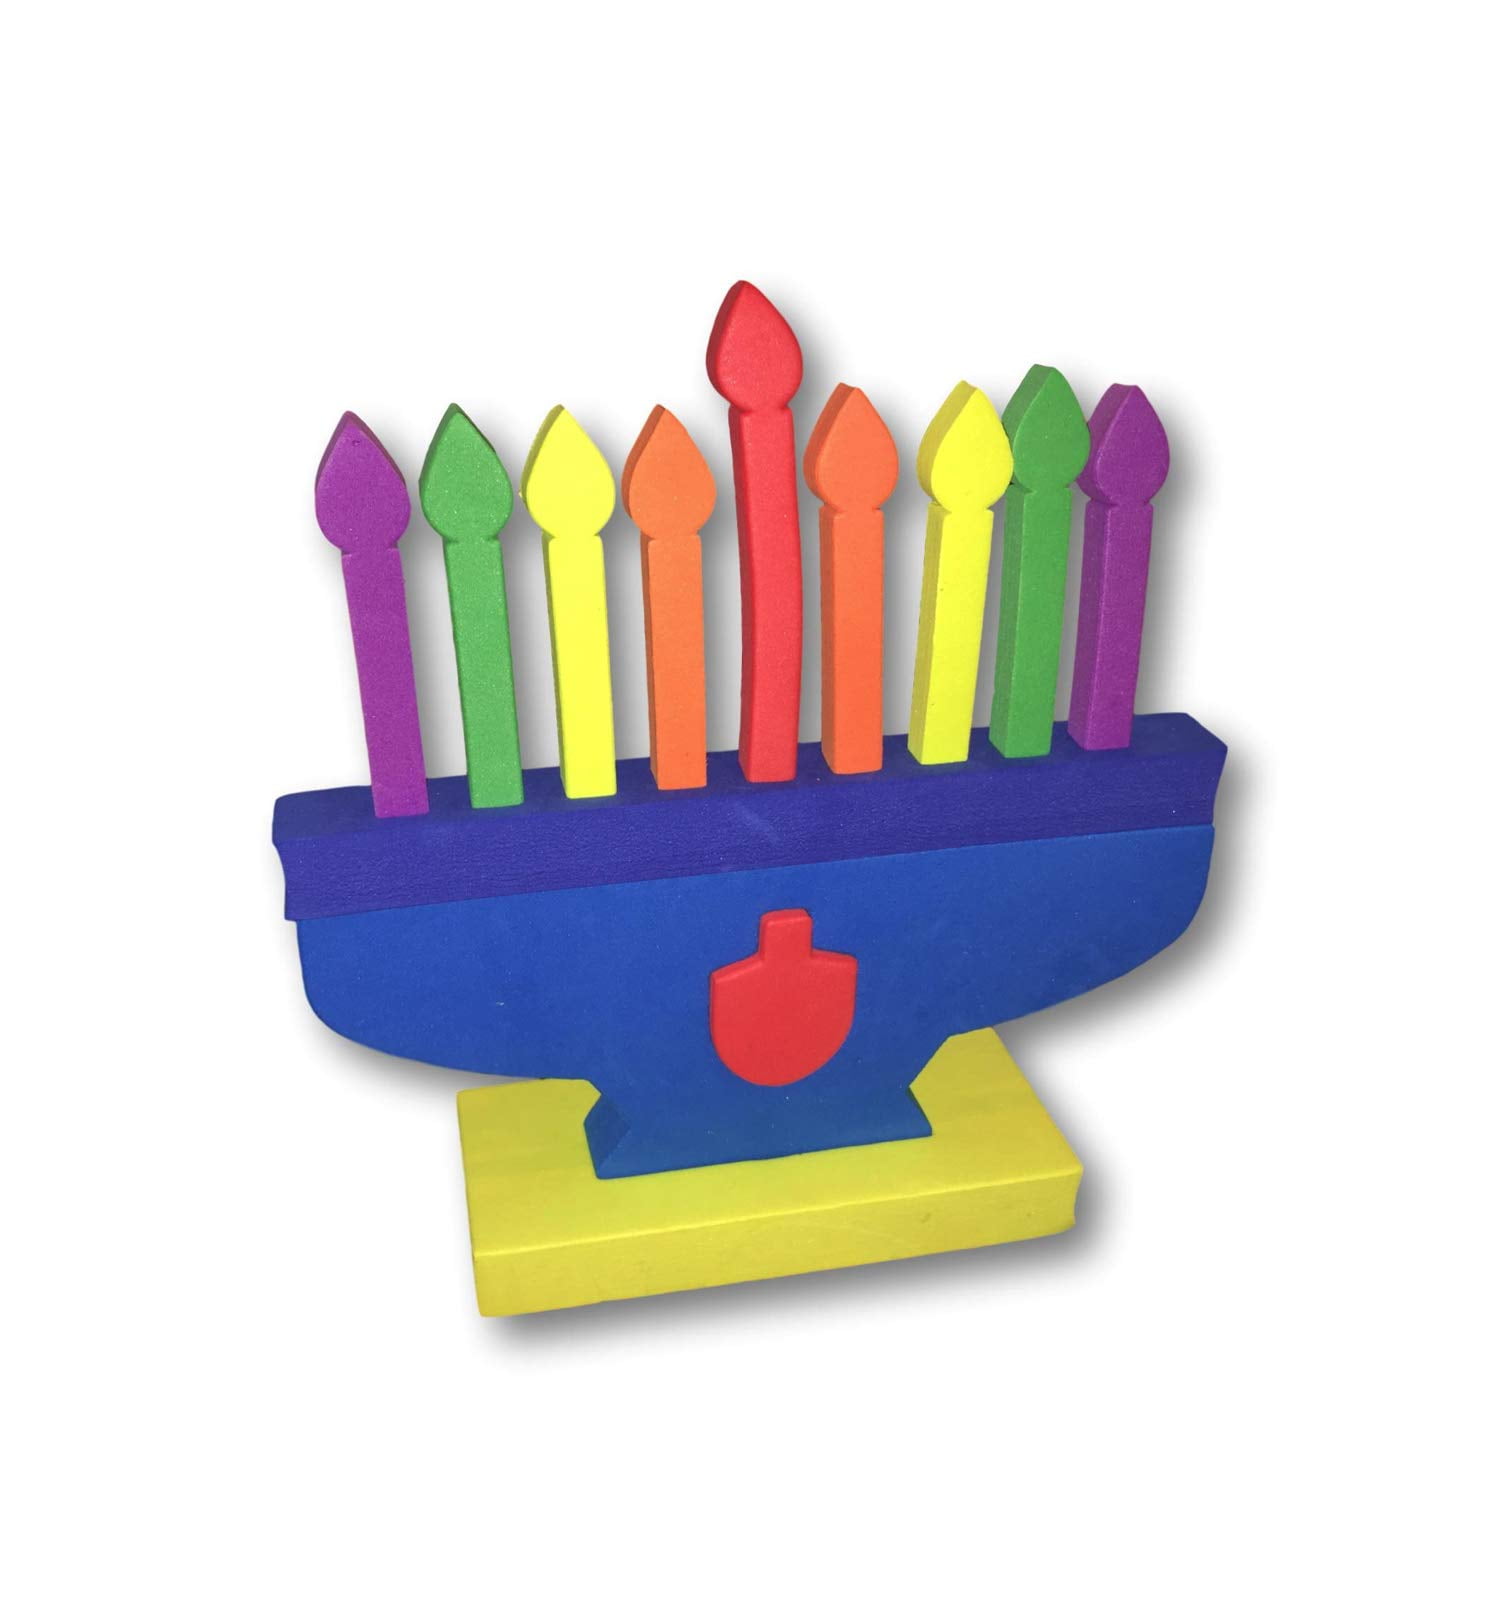 Hanukkah Foam Toy Menorah with Removable Colorful Candles